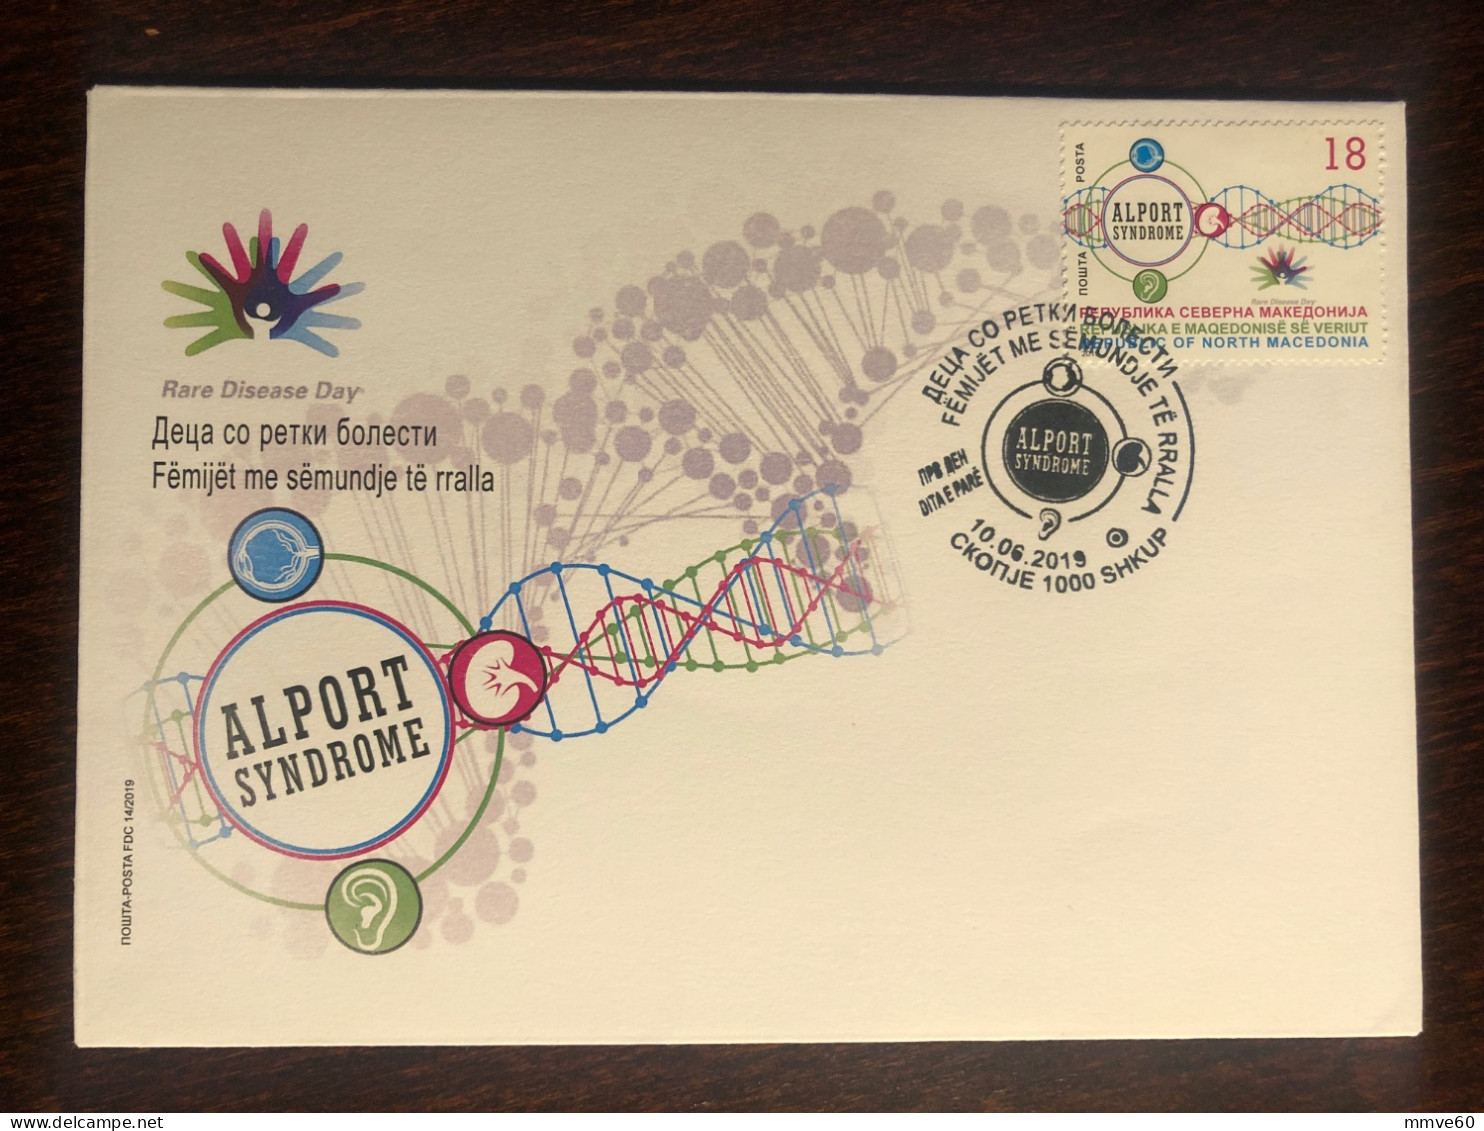 MACEDONIA FDC COVER 2019 YEAR CHILDREN RARE DISEASES - ALPORT SYNDROME HEALTH MEDICINE STAMPS - Nordmazedonien